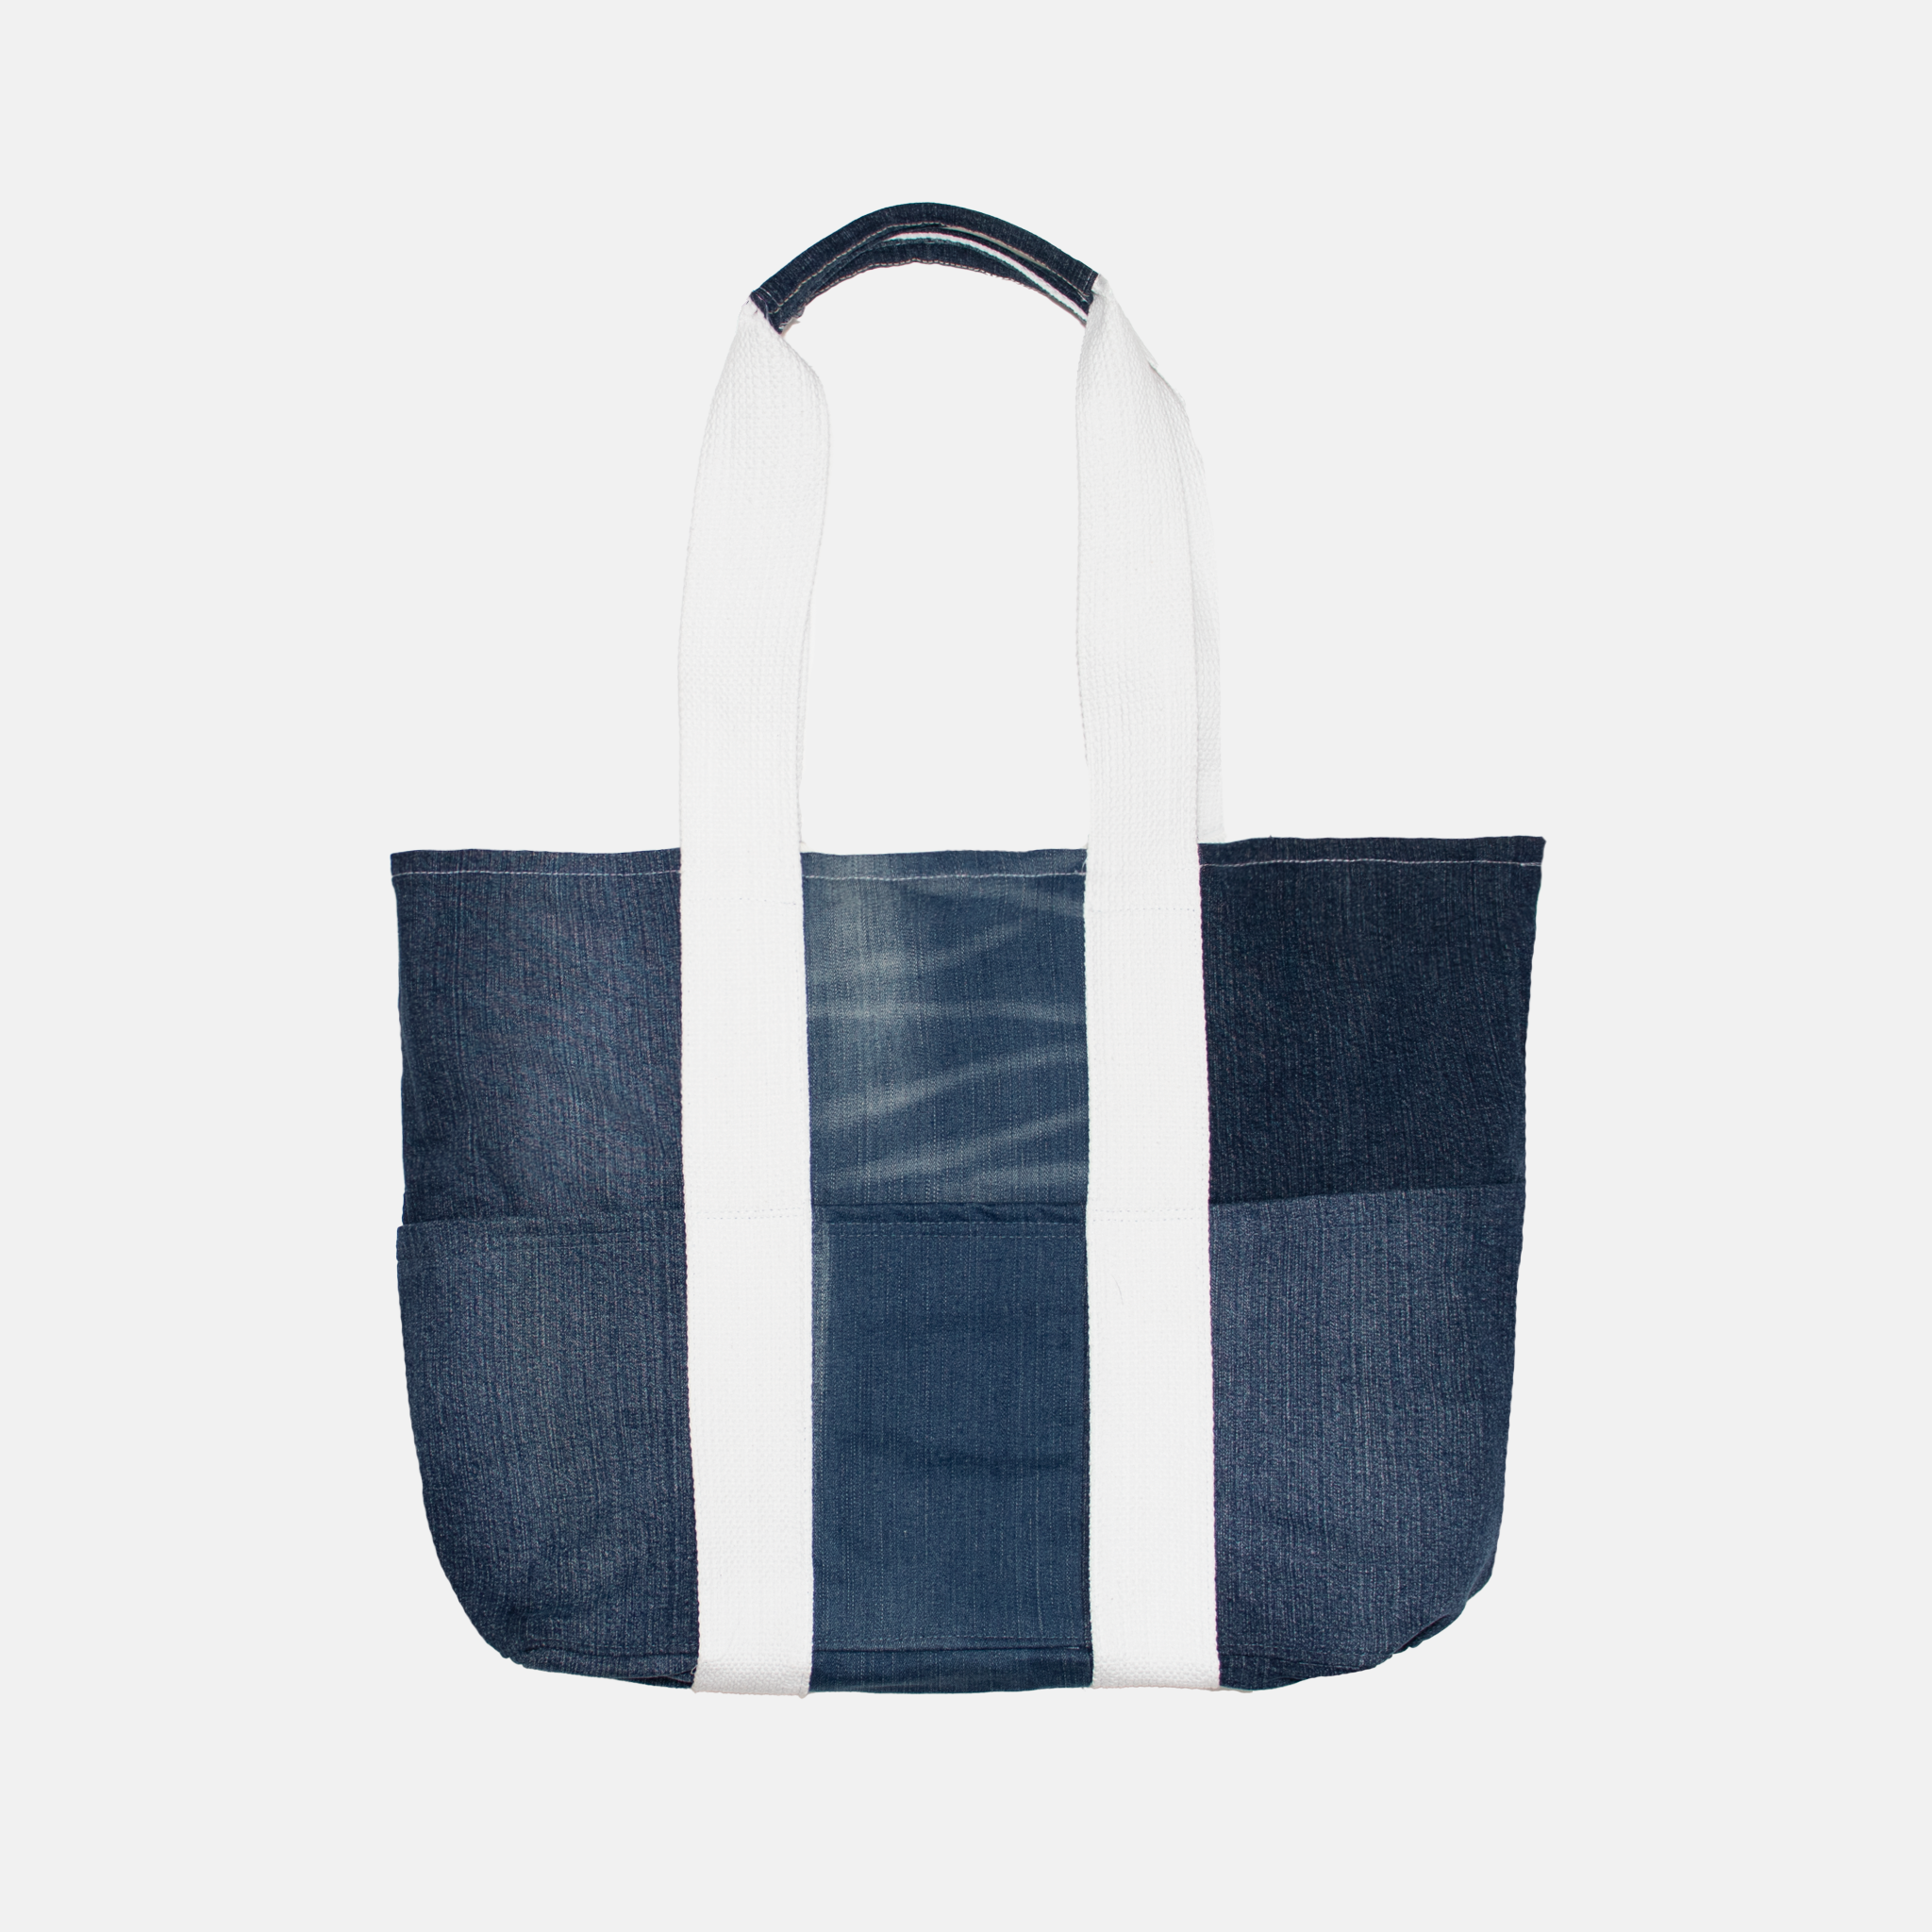 The recycled reversible weekend bag